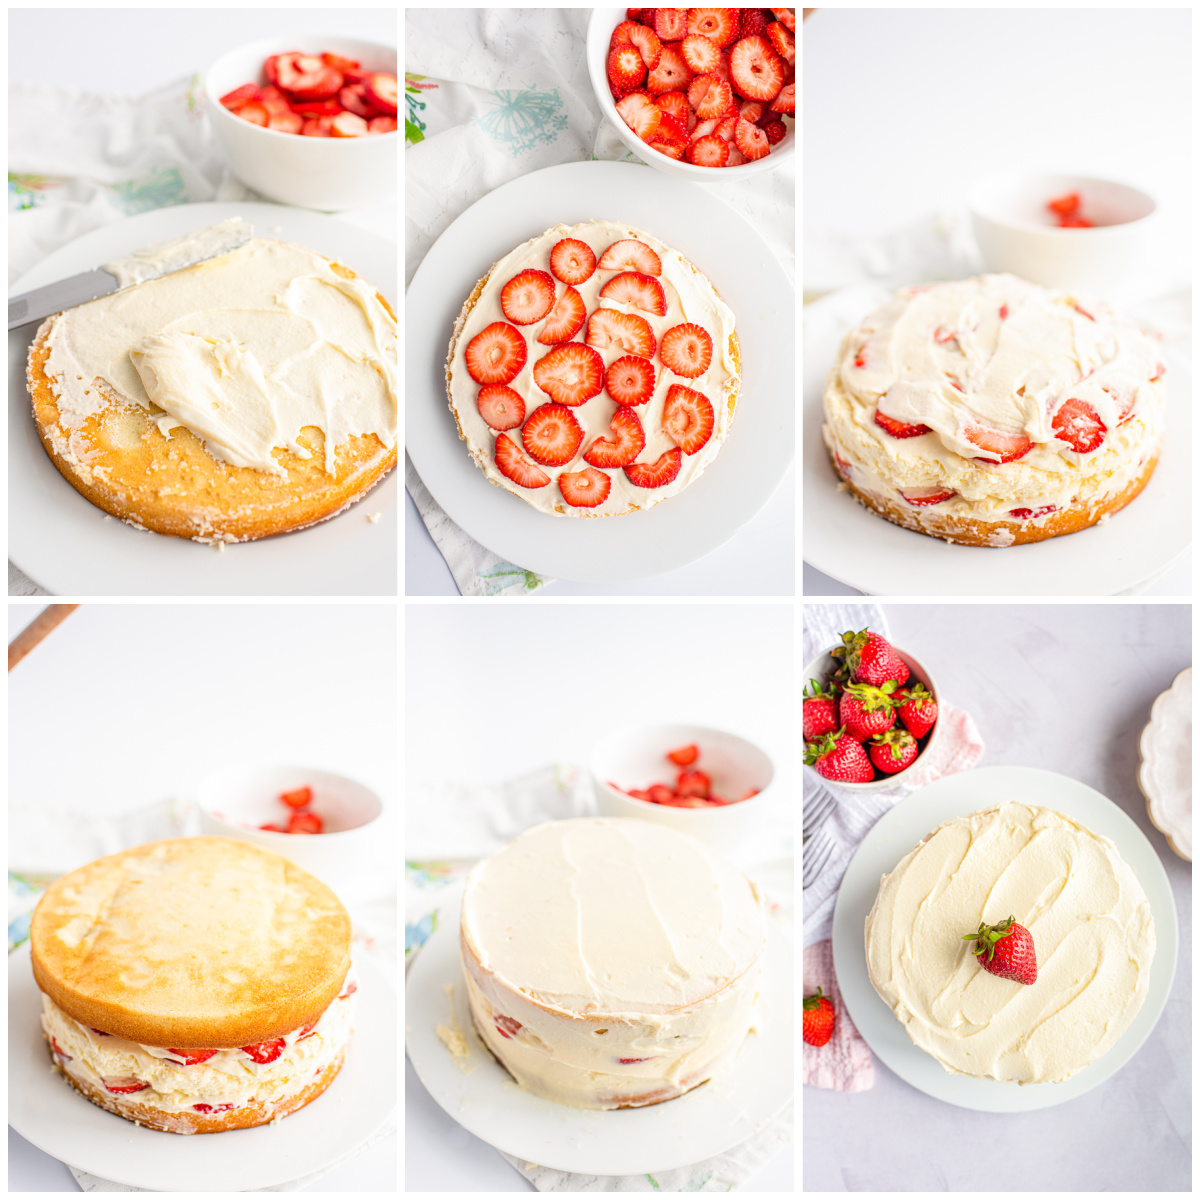 Step by step photos on how to assemble a Cheesecake Cake